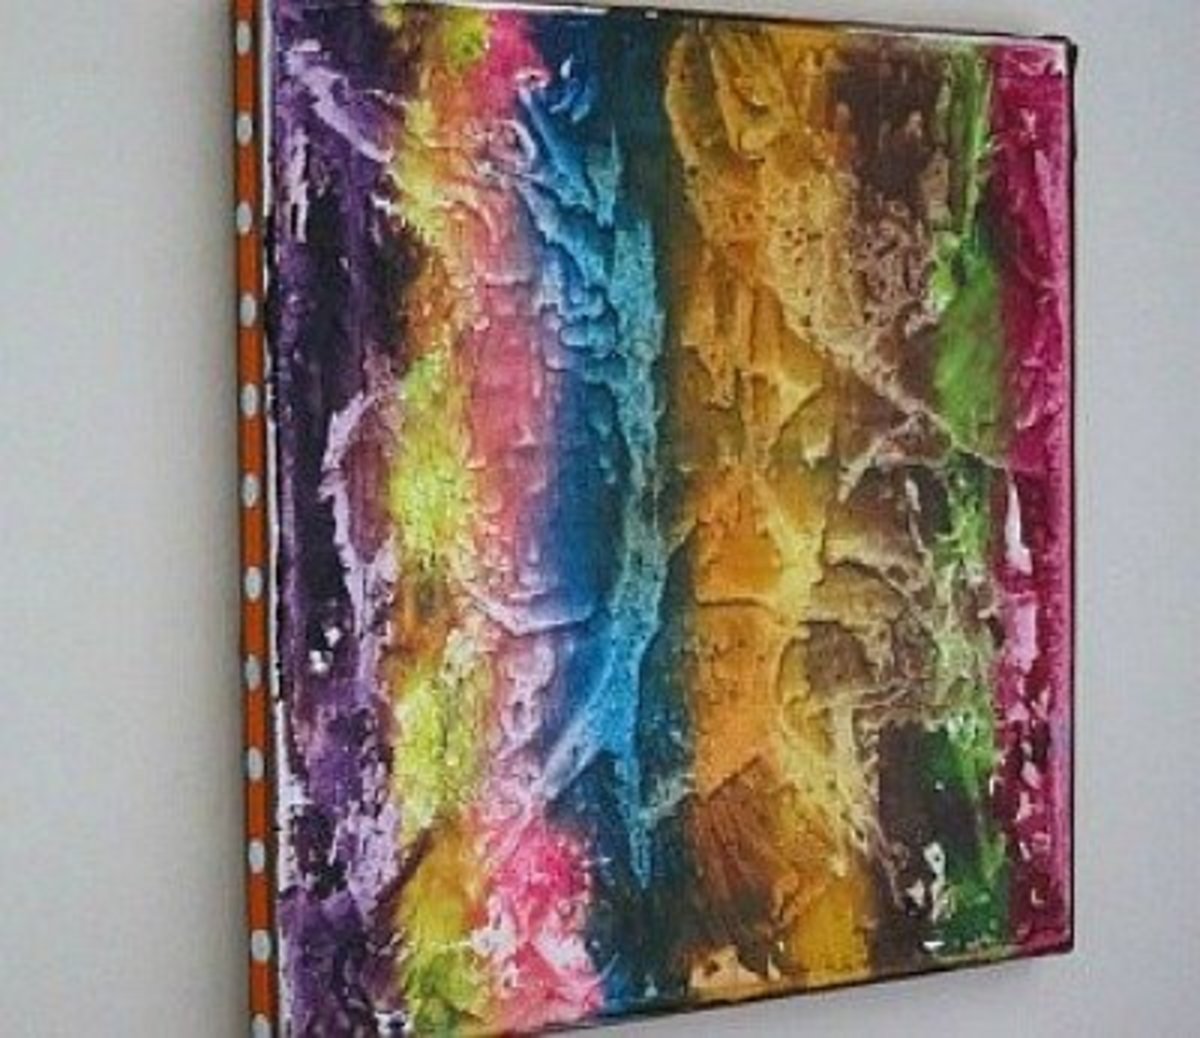 melted-crayons-colors-of-art